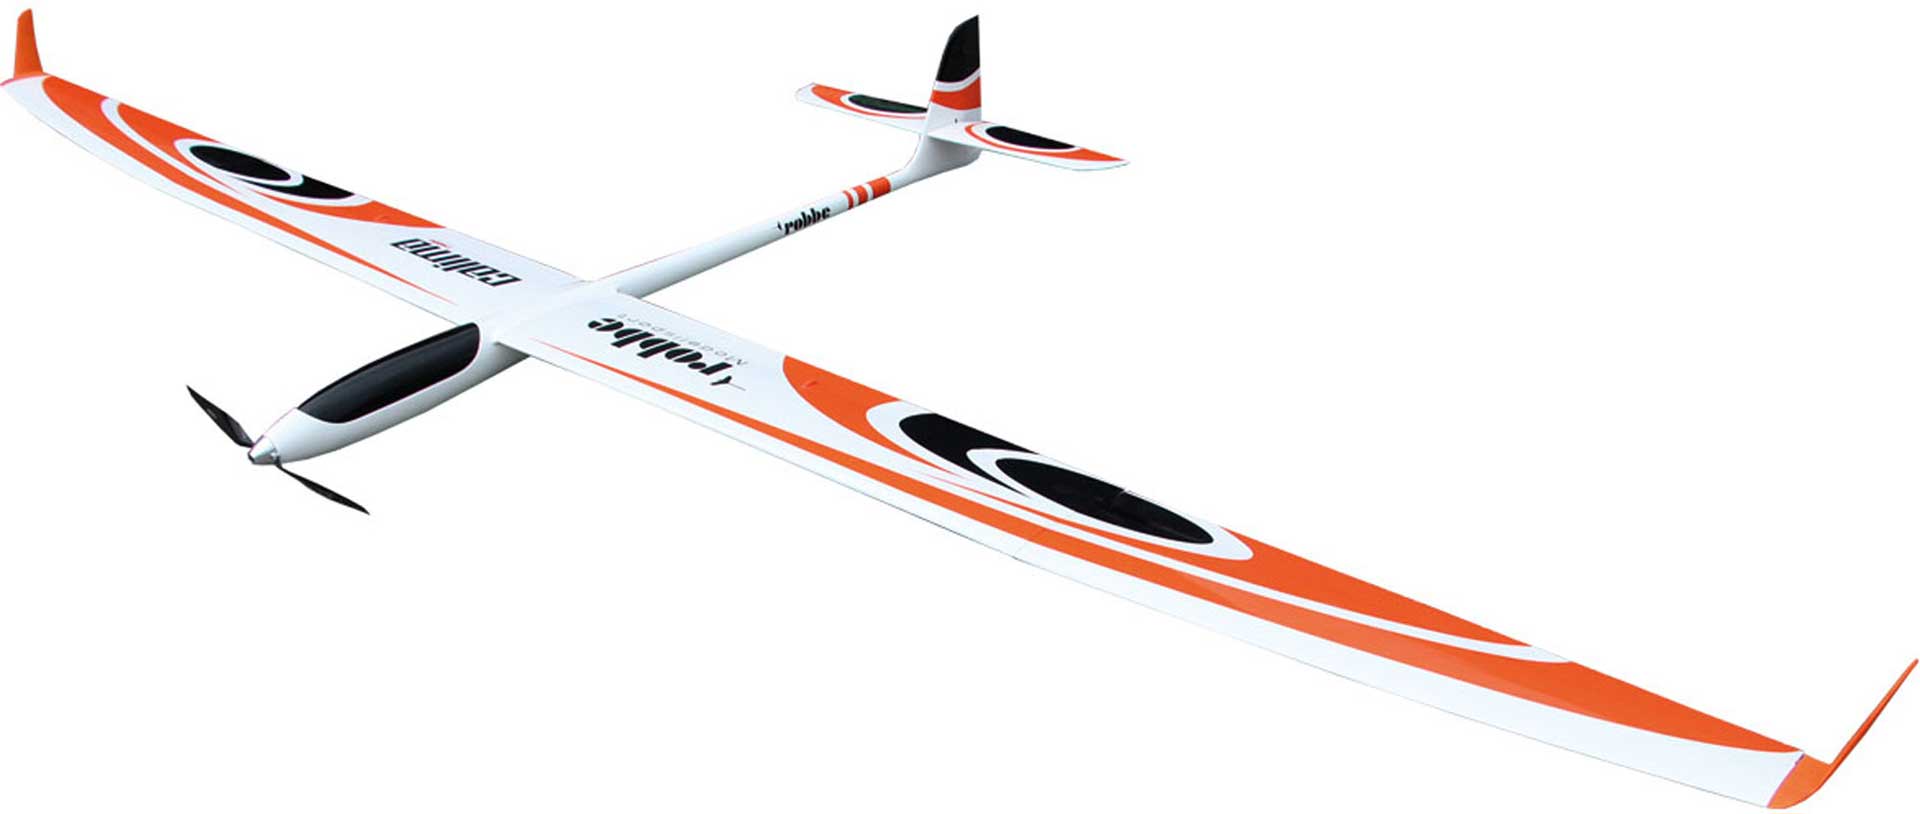 Robbe Modellsport CALIMA PNP HIGH PERFORMANCE GLIDER WITH 4-FLAP WINGS AND INTEGRATED SERVOS